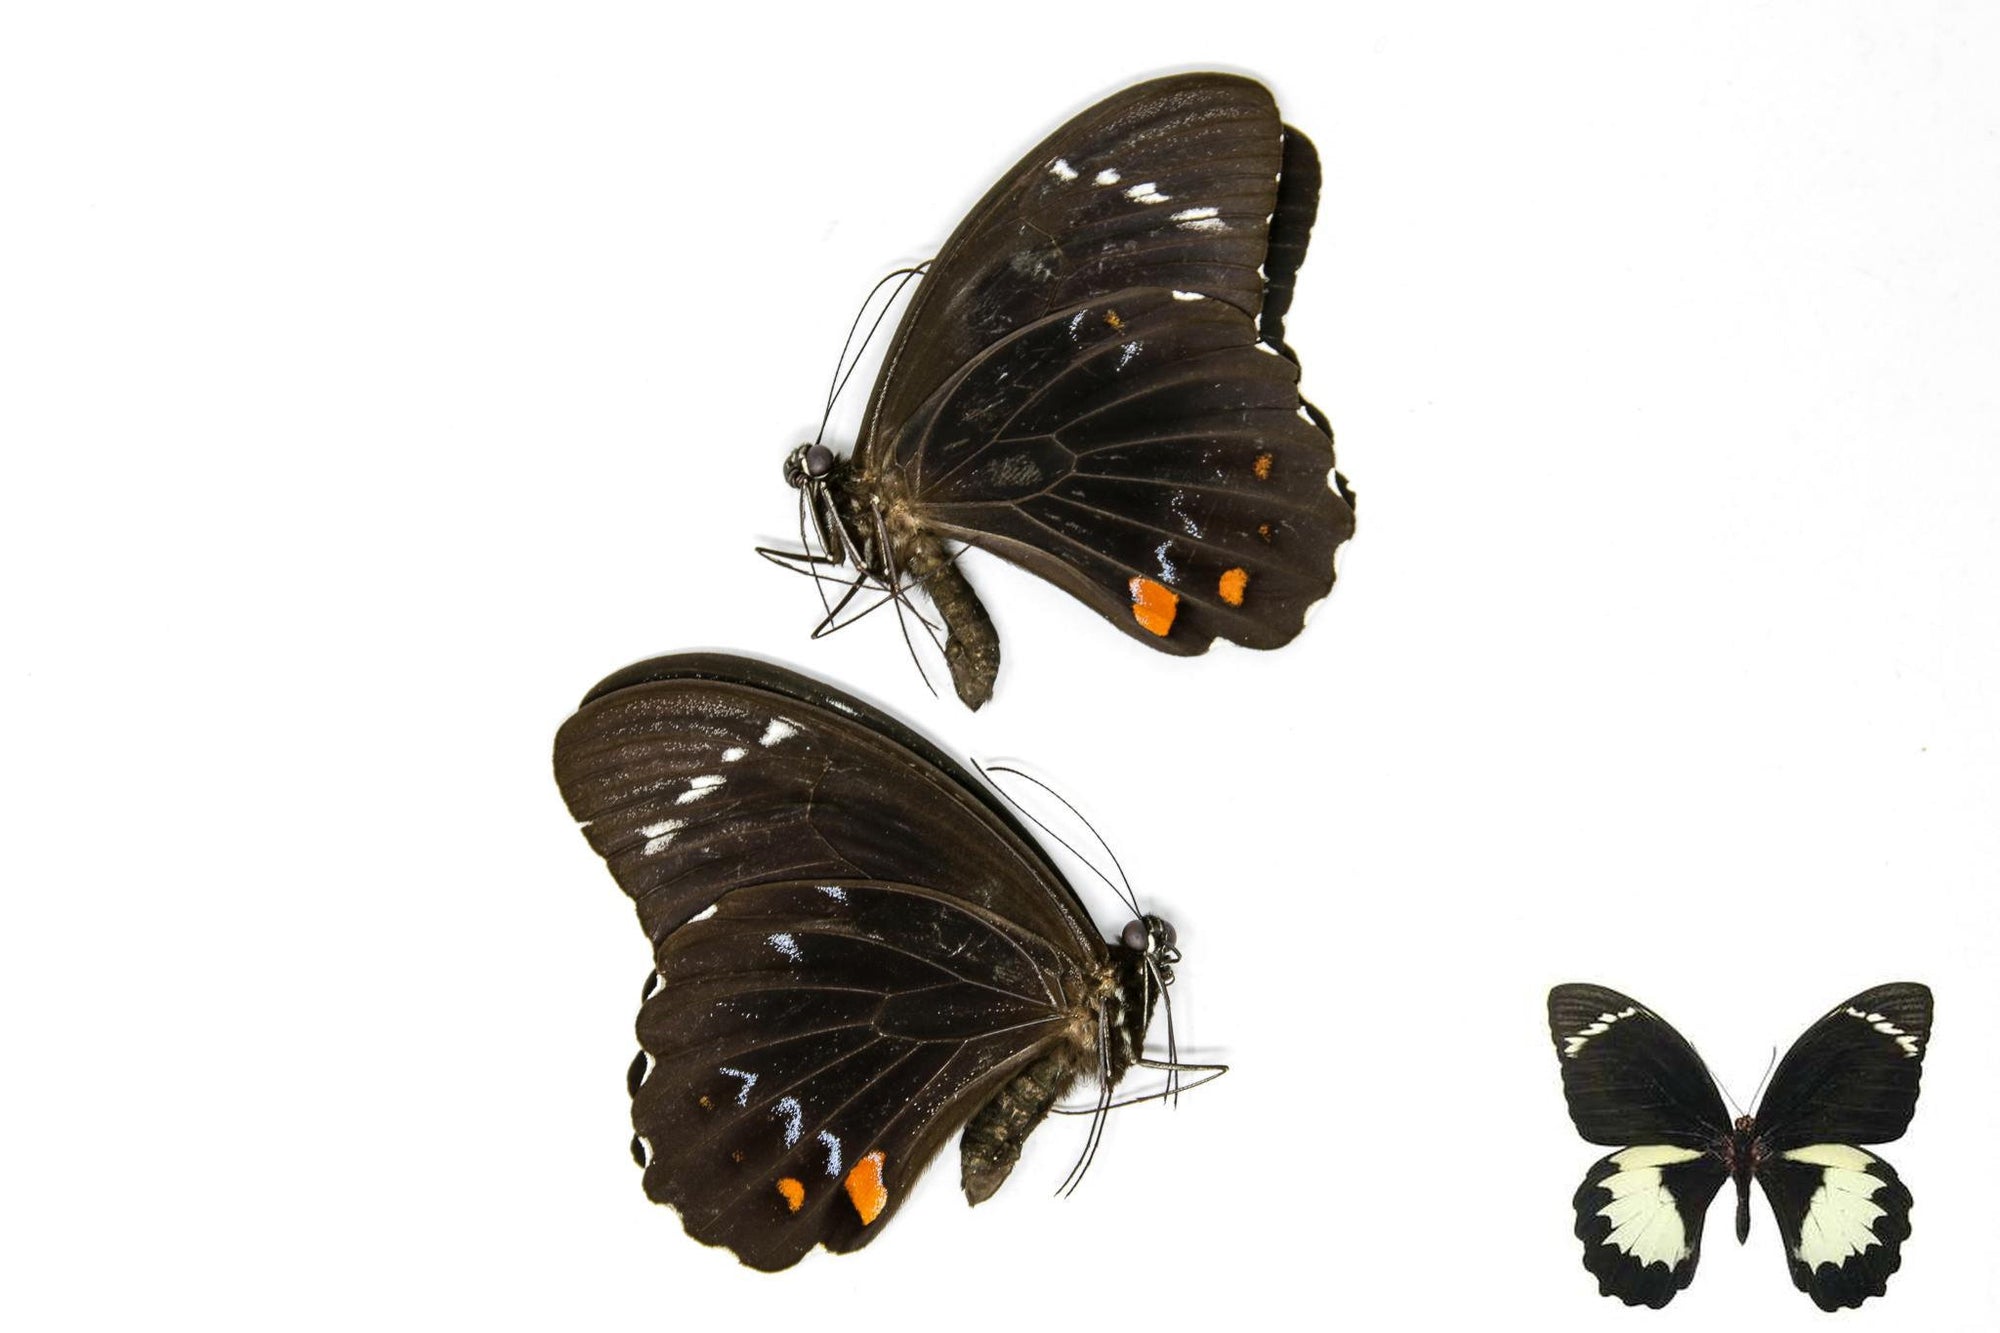 2 x  Papilio aegeus | Orchard Swallowtail Butterflies | A1 Unmounted Specimens